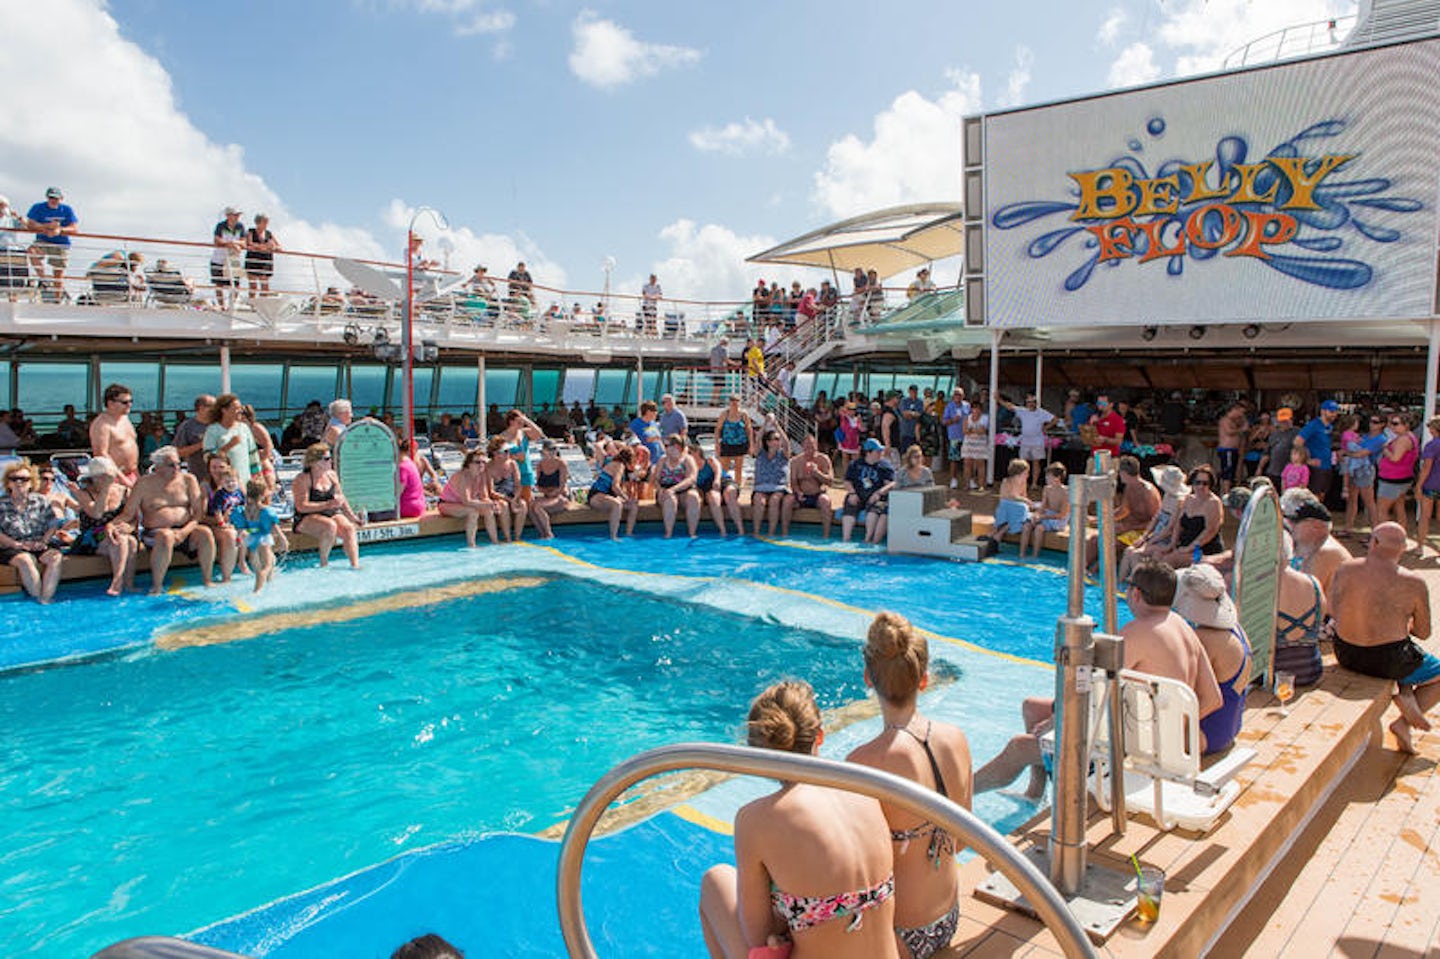 Men's Belly Flop Contest at the Main Pool on Vision of the Seas